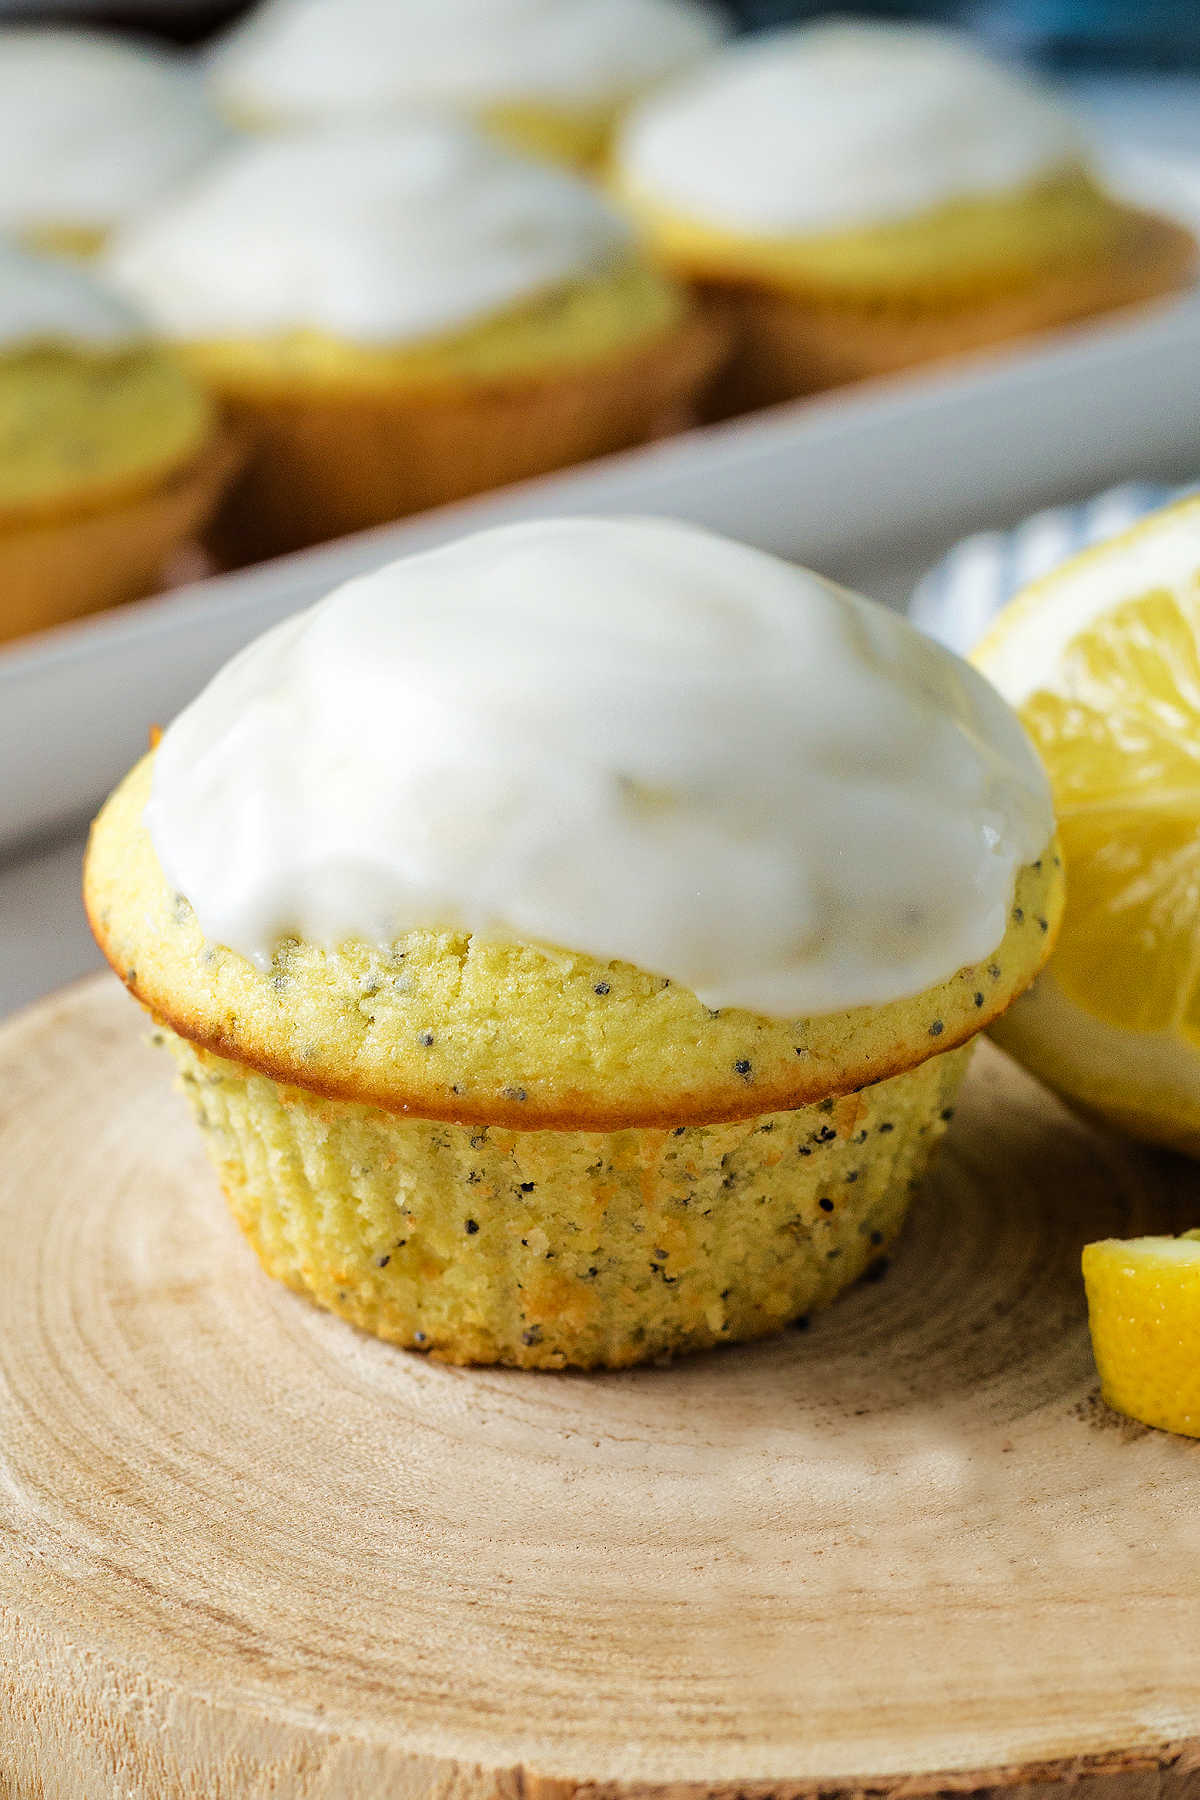 a glazed lemon poppyseed muffin on a wooden block wit a tray of muffins in the background.